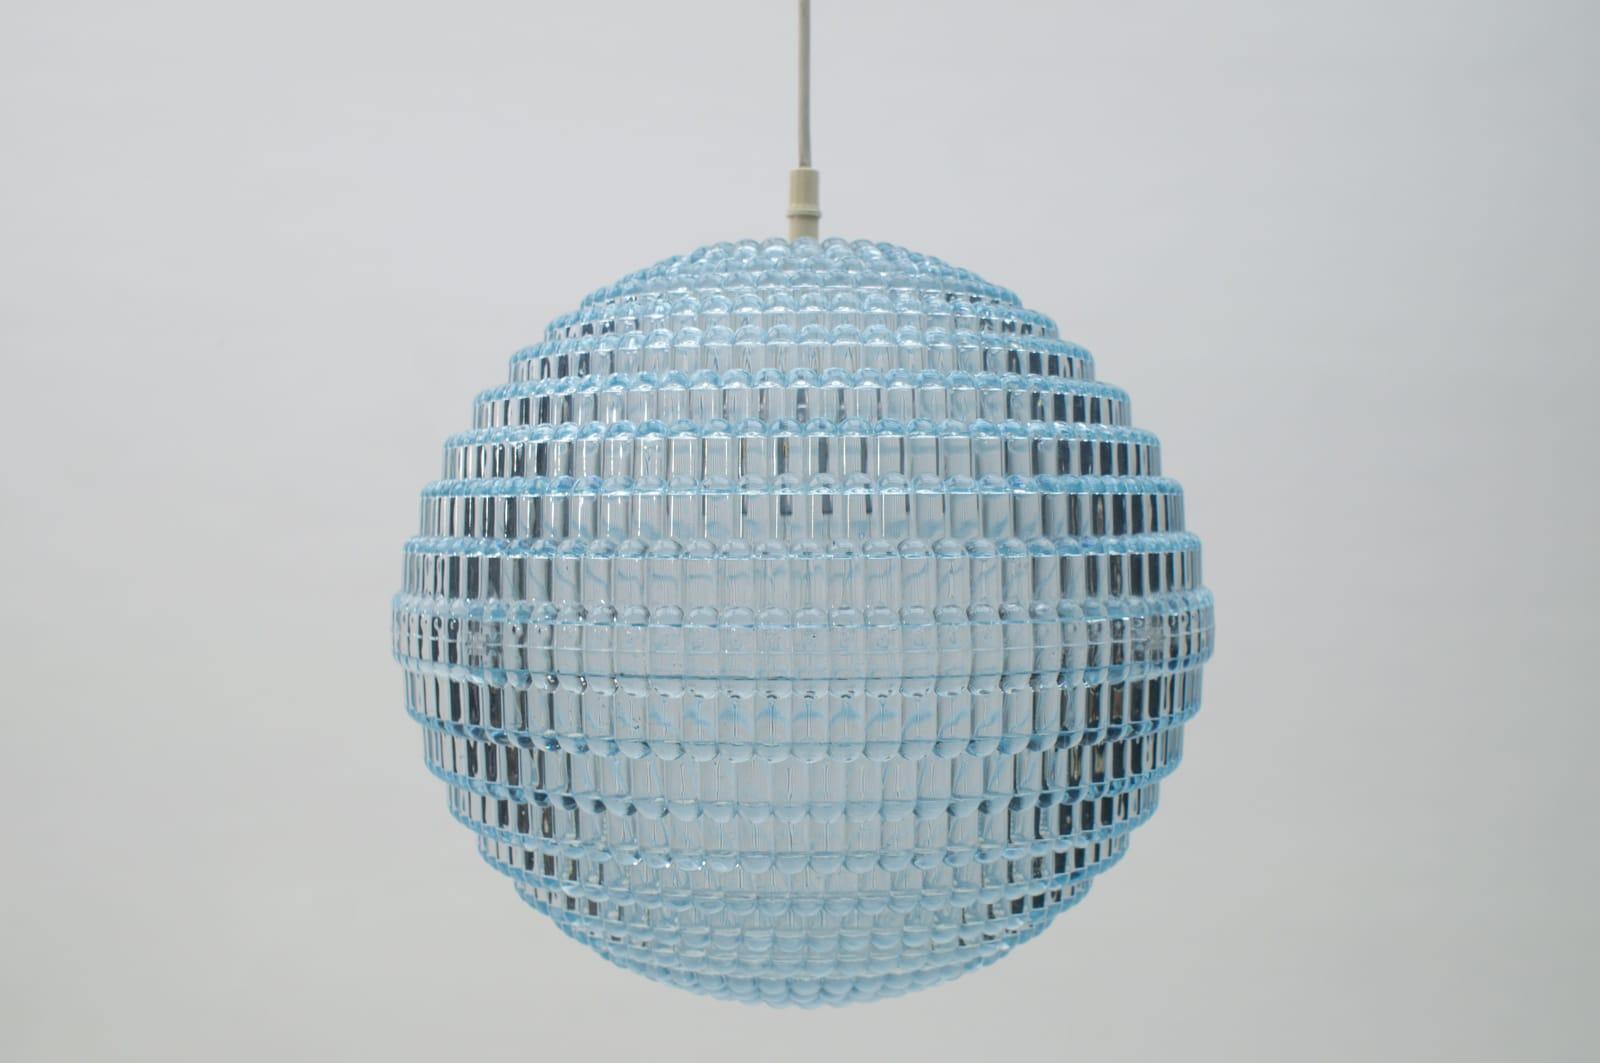 Ceiling lamp by Aloys F. Gangkofner for Erco Leuchten, Germany Lüdenscheid, 1960s.

A very rare, interesting and decorative lamp.

Fully functional.

With an E27 socket. Works with 220V and 110V.